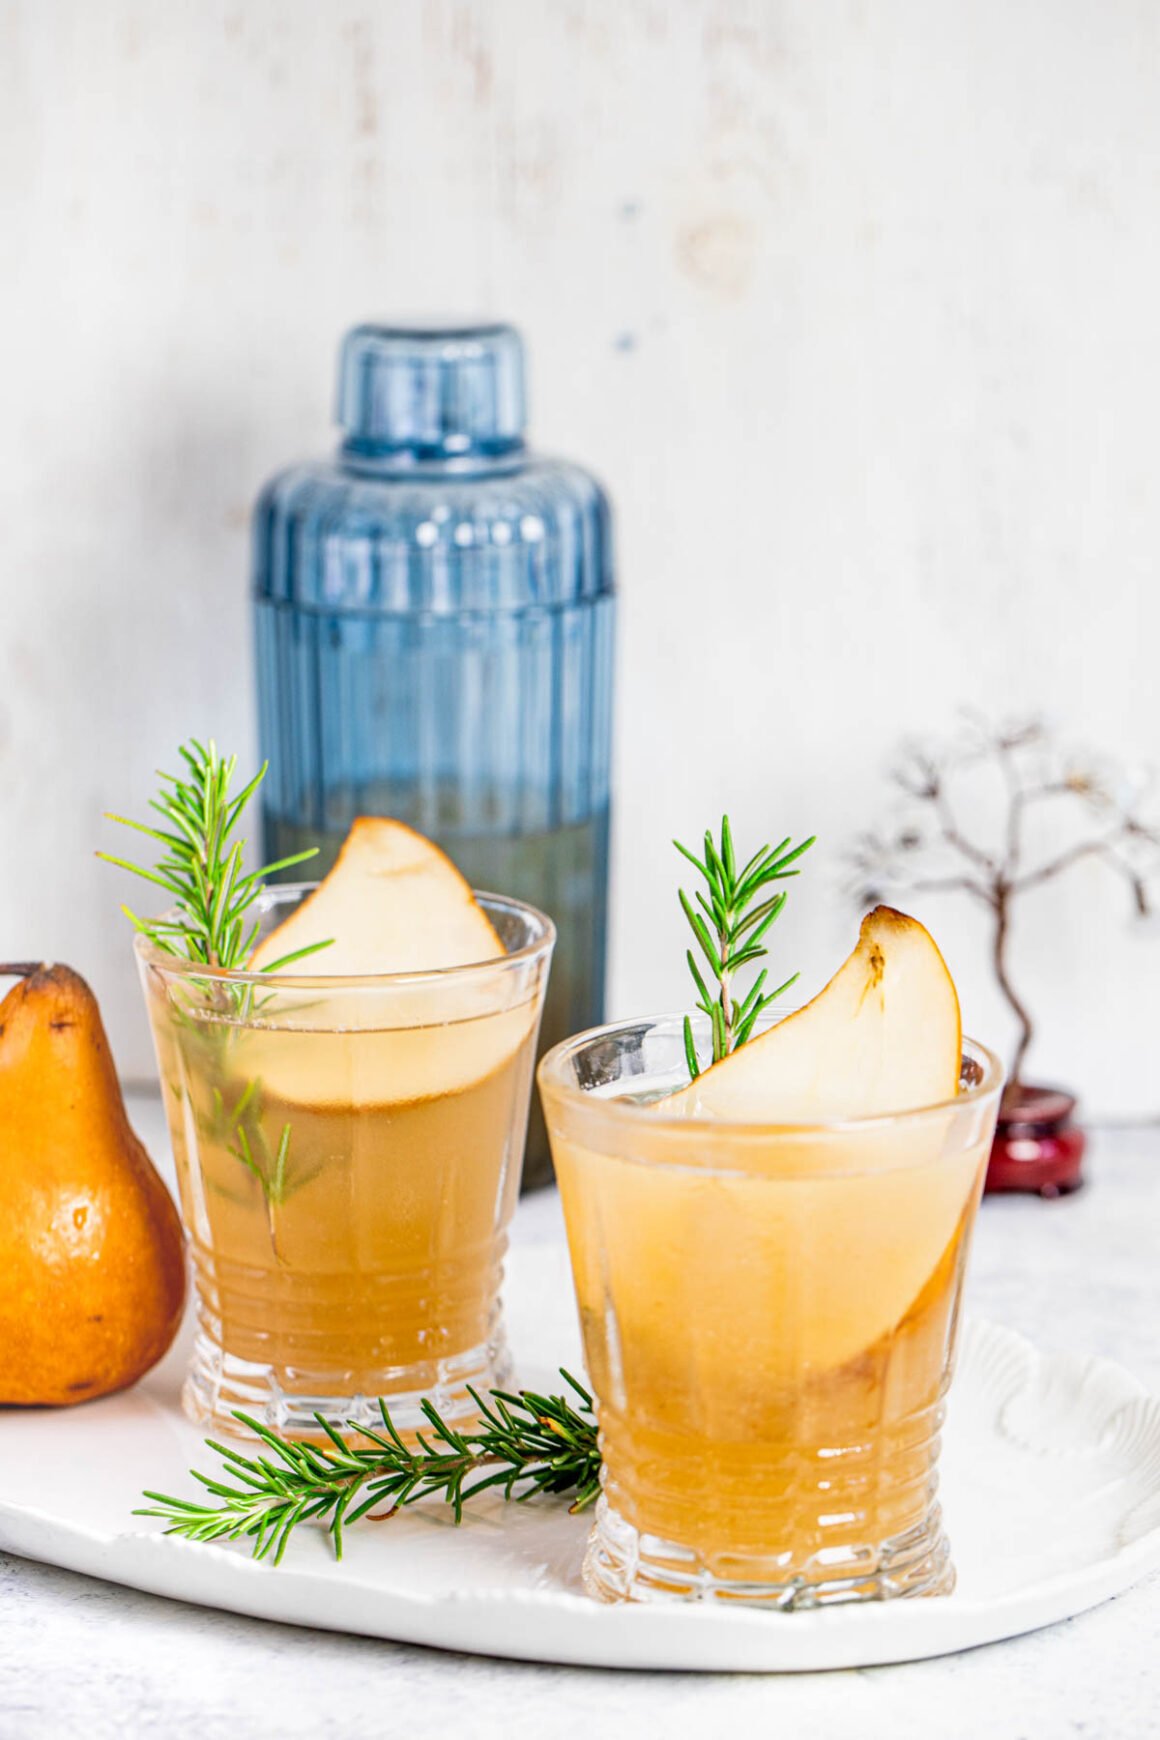 The Pear Gin cocktail is a delicious blend of sweet pear flavors and the botanical complexities of gin.